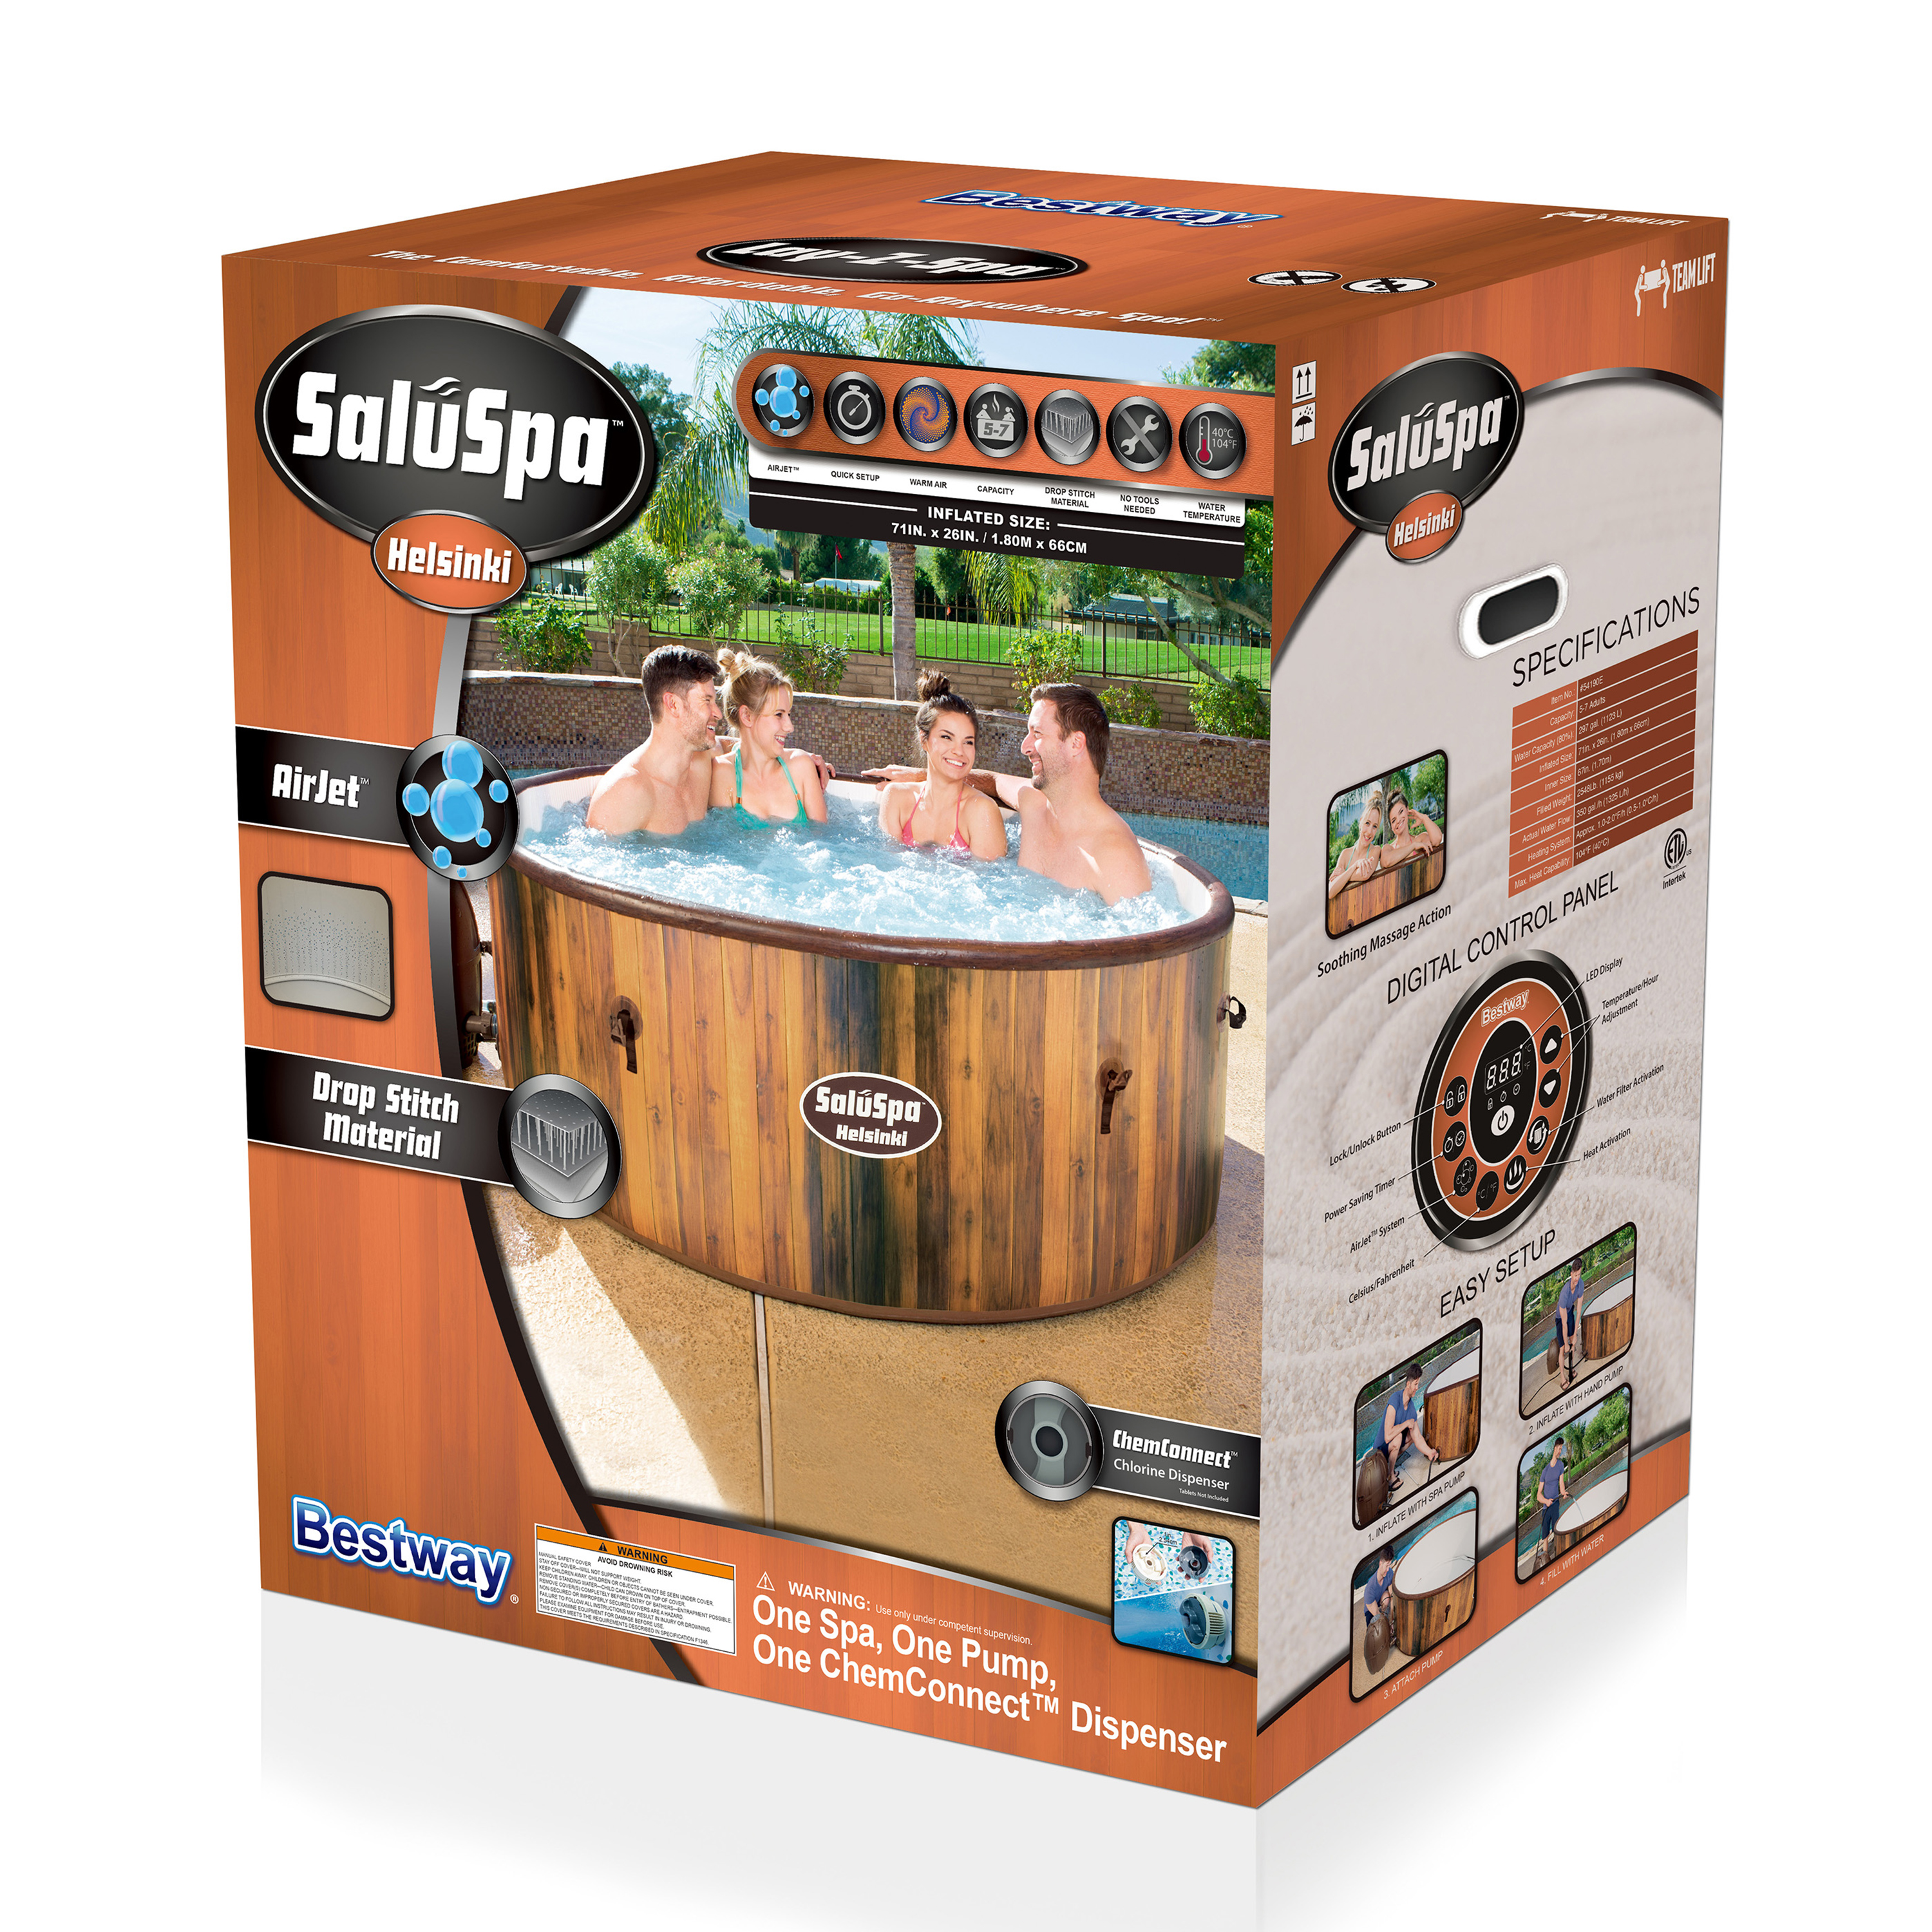 Bestway 54190E SaluSpa Helsinki AirJet 7 Person Inflatable Hot Tub Spa with Pump - image 5 of 12